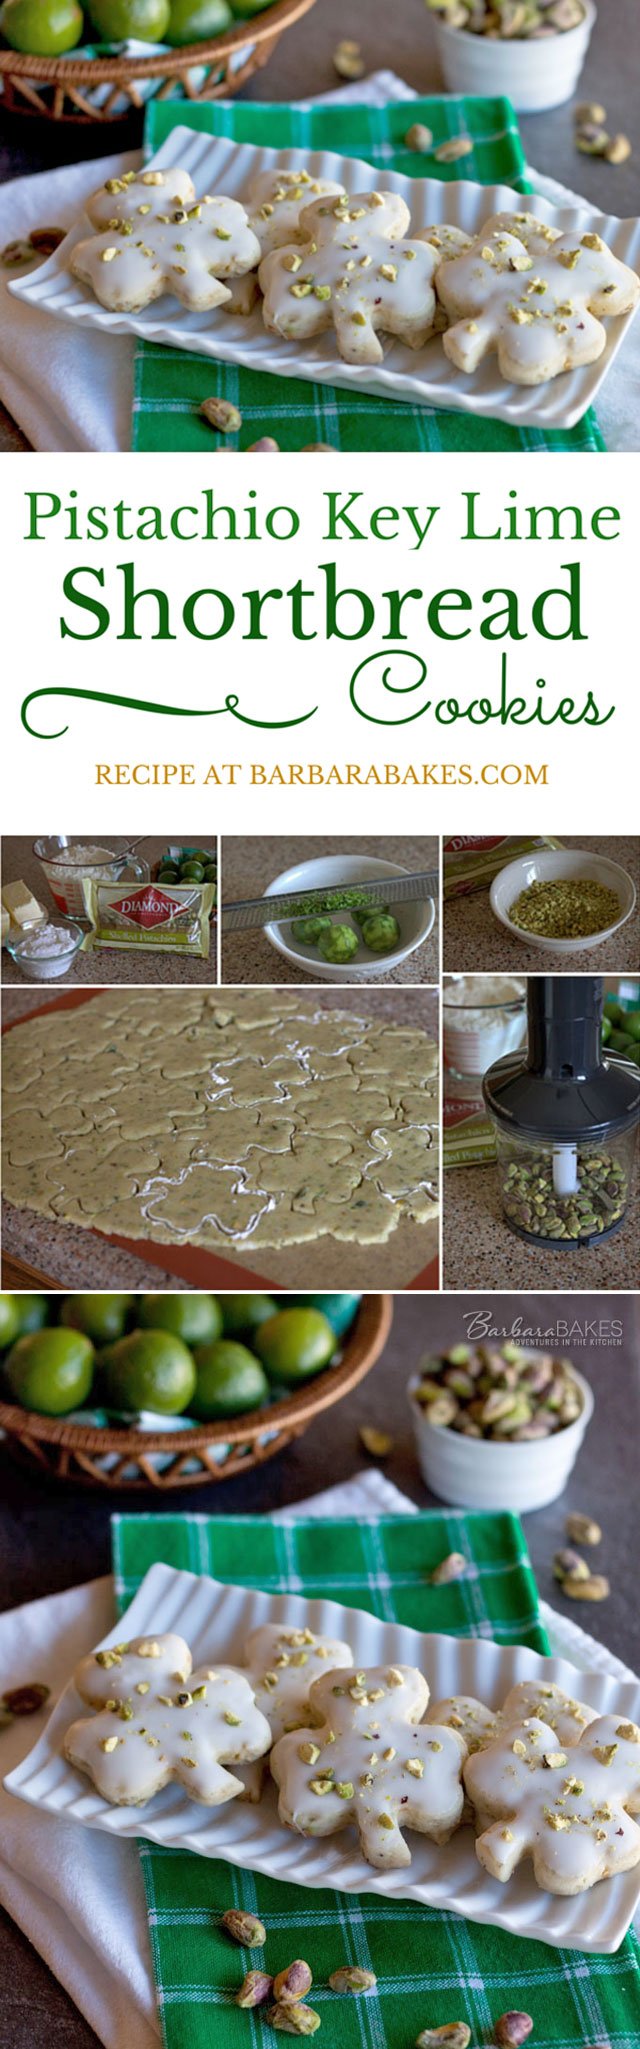 Collage of making Pistachio Key Lime Shortbread Cookies for St. Patrick's Day